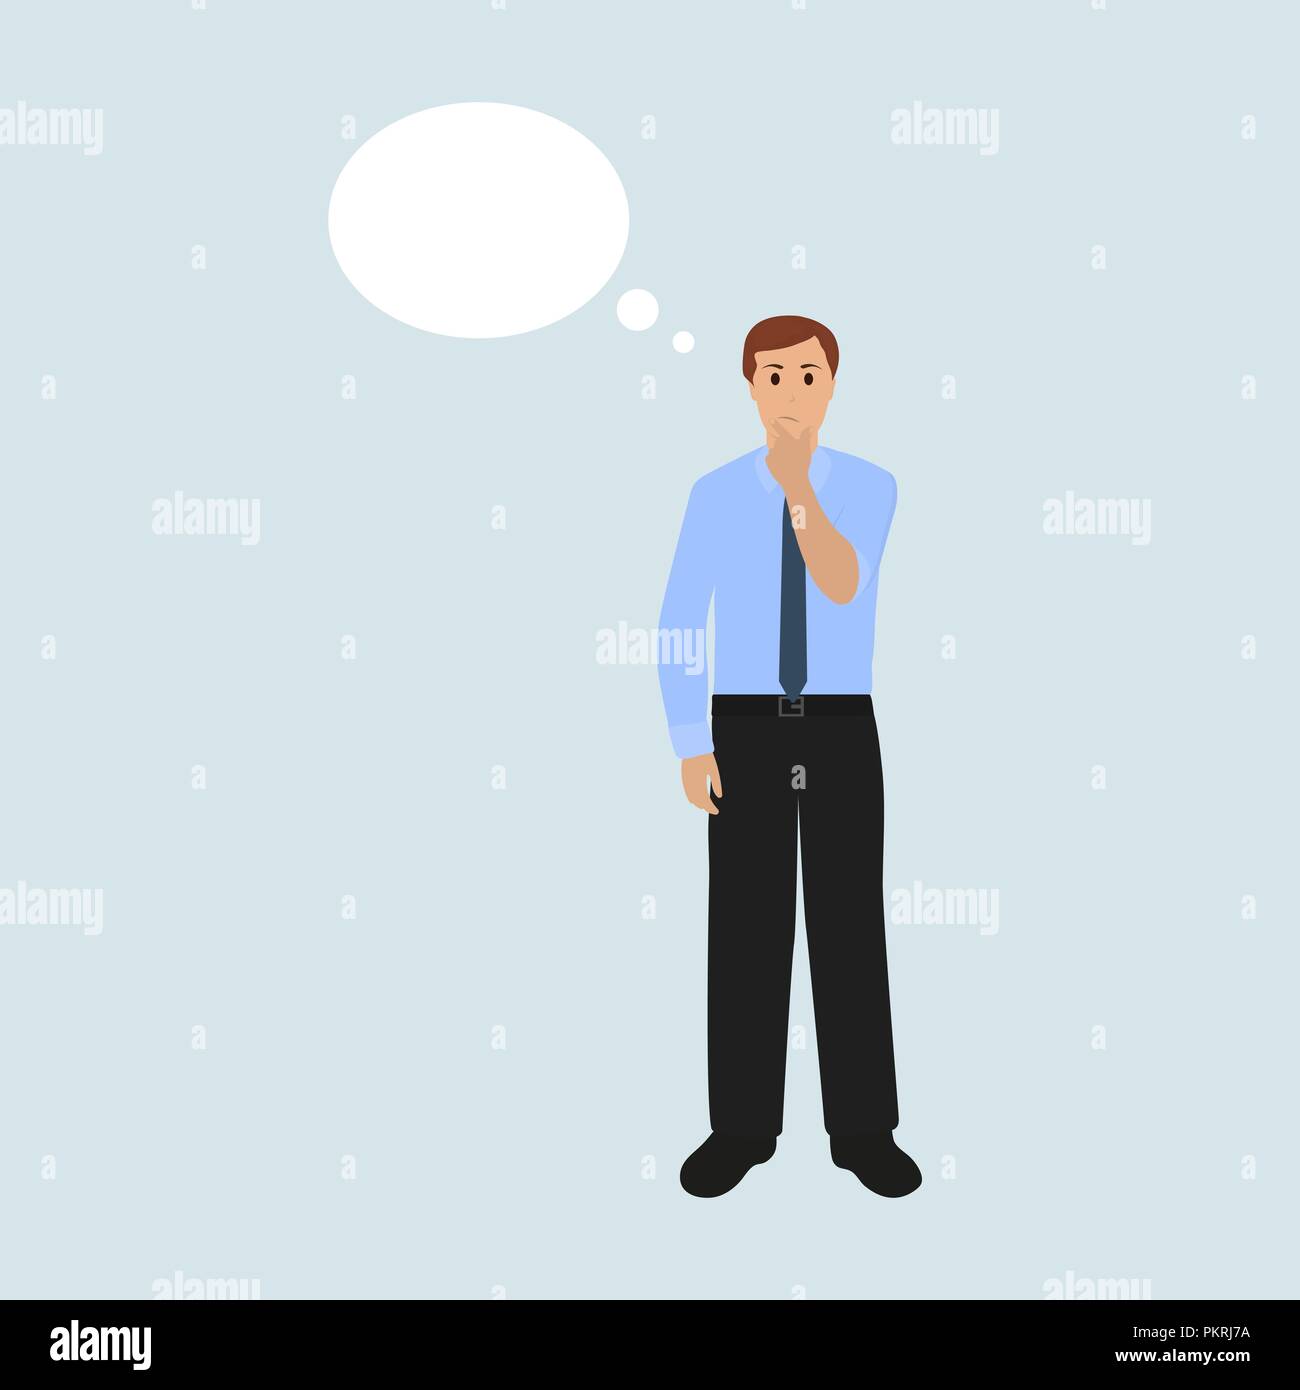 Man thought about new ideas Stock Vector